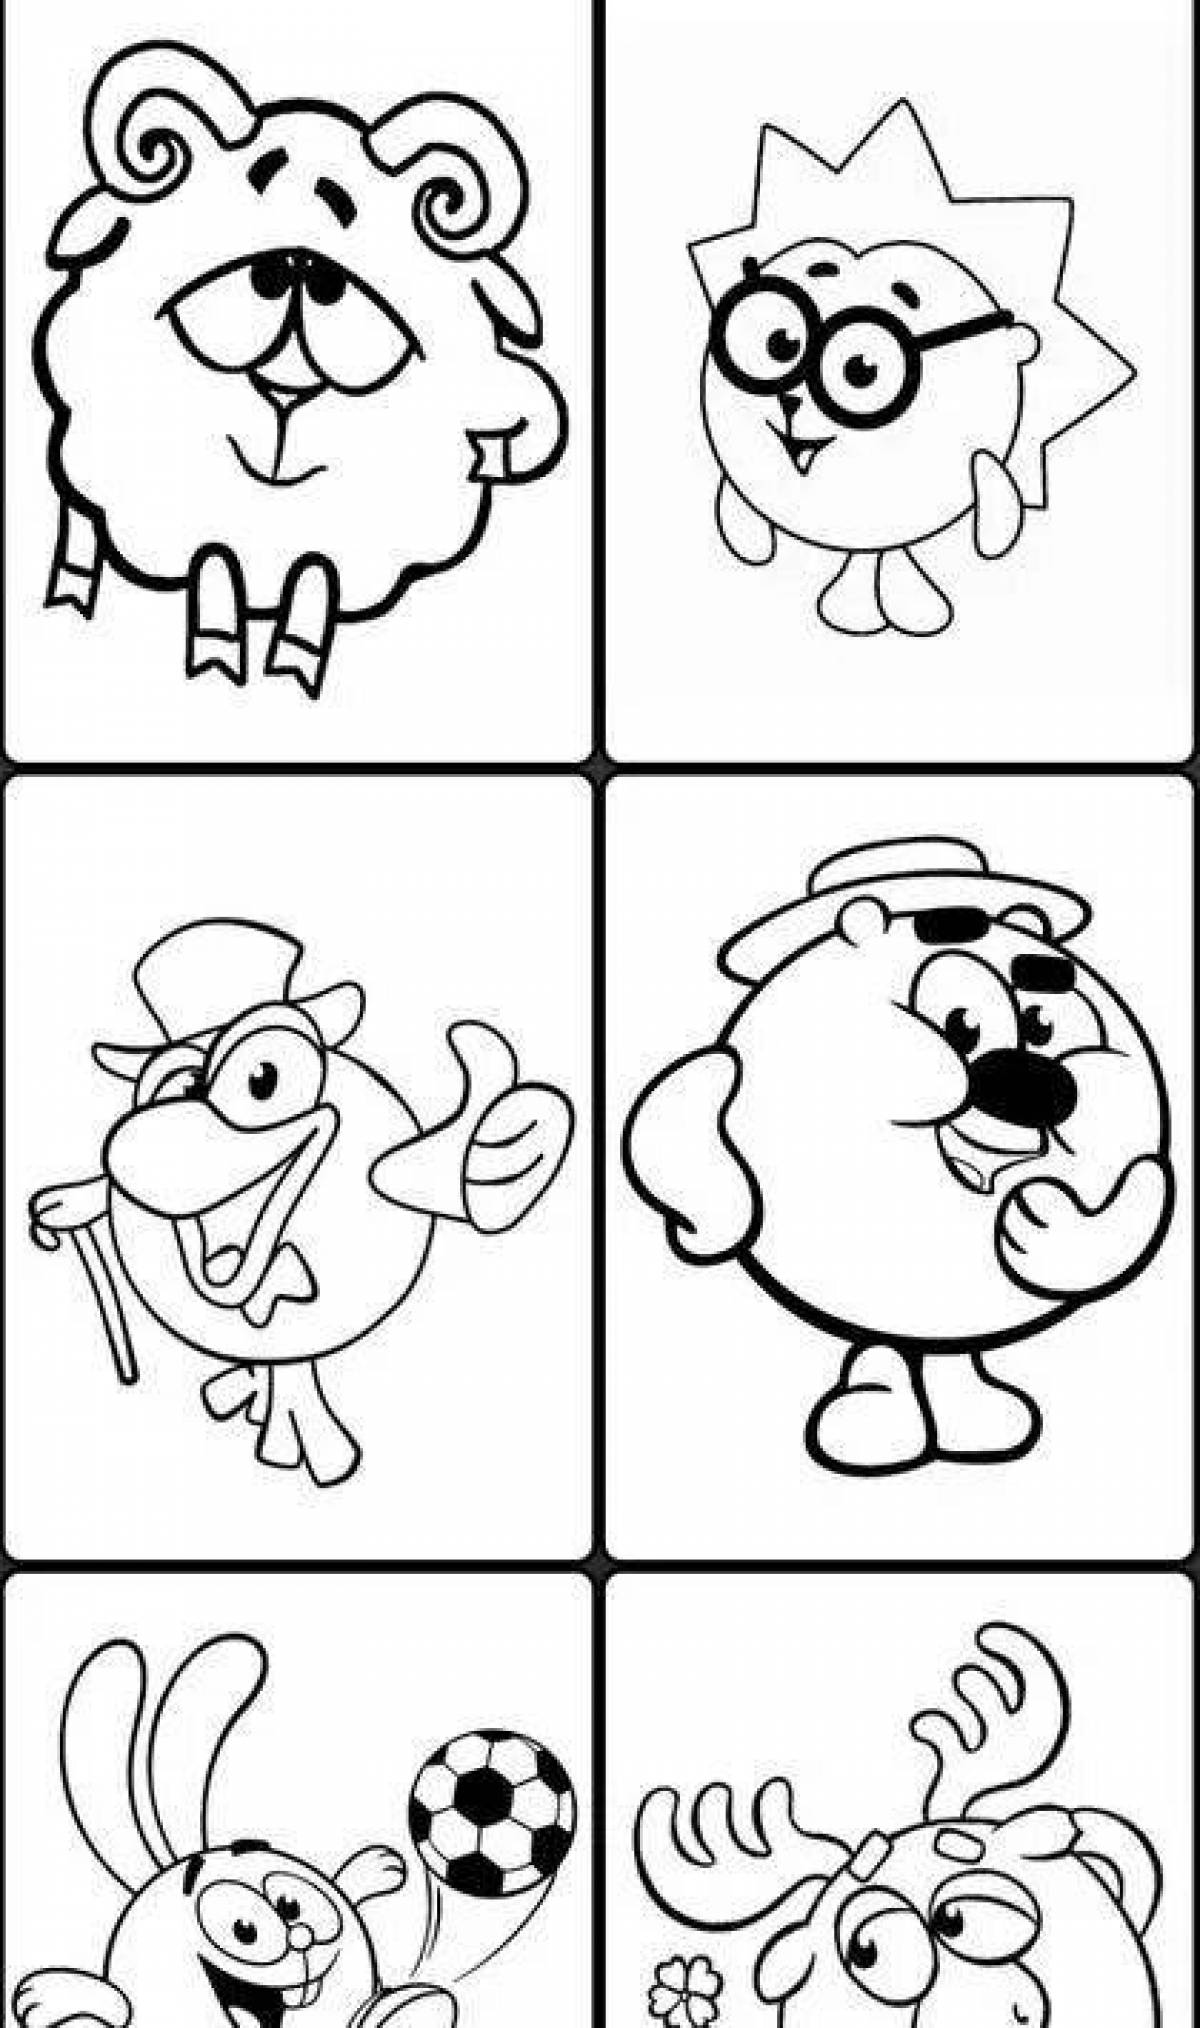 Coloring pages all smeshariki together coloring pages